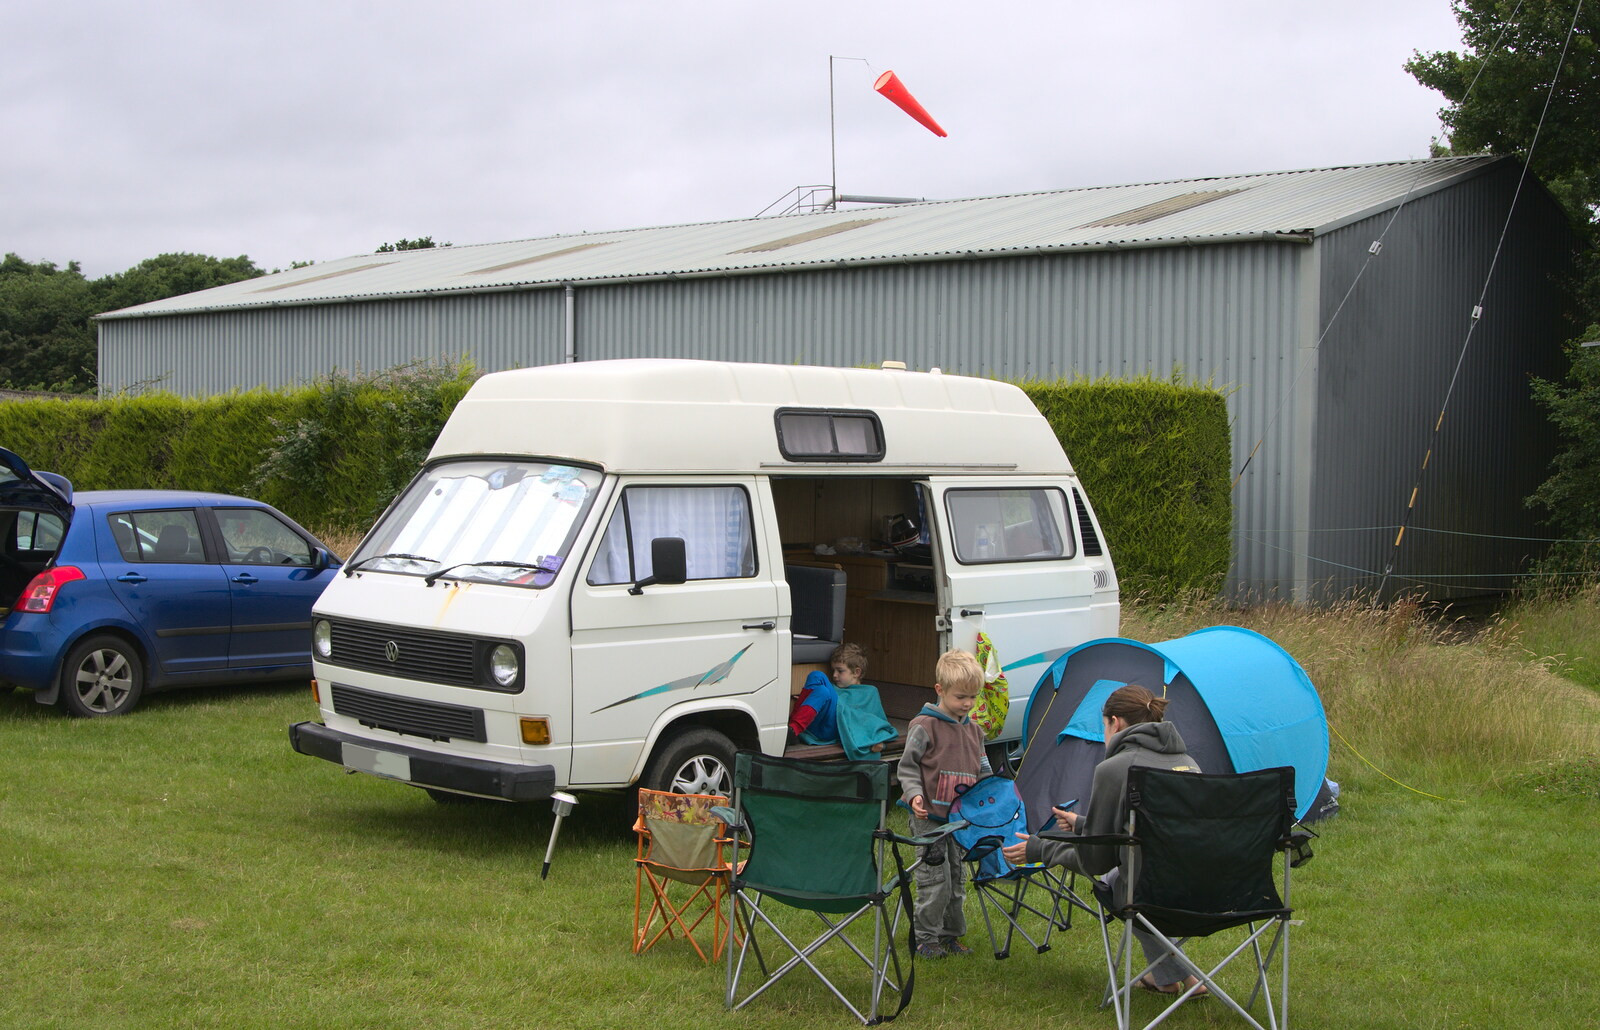 Camping by the van, on the runway from "Our Little Friends" Warbirds Hangar Dance, Hardwick, Norfolk - 9th July 2016